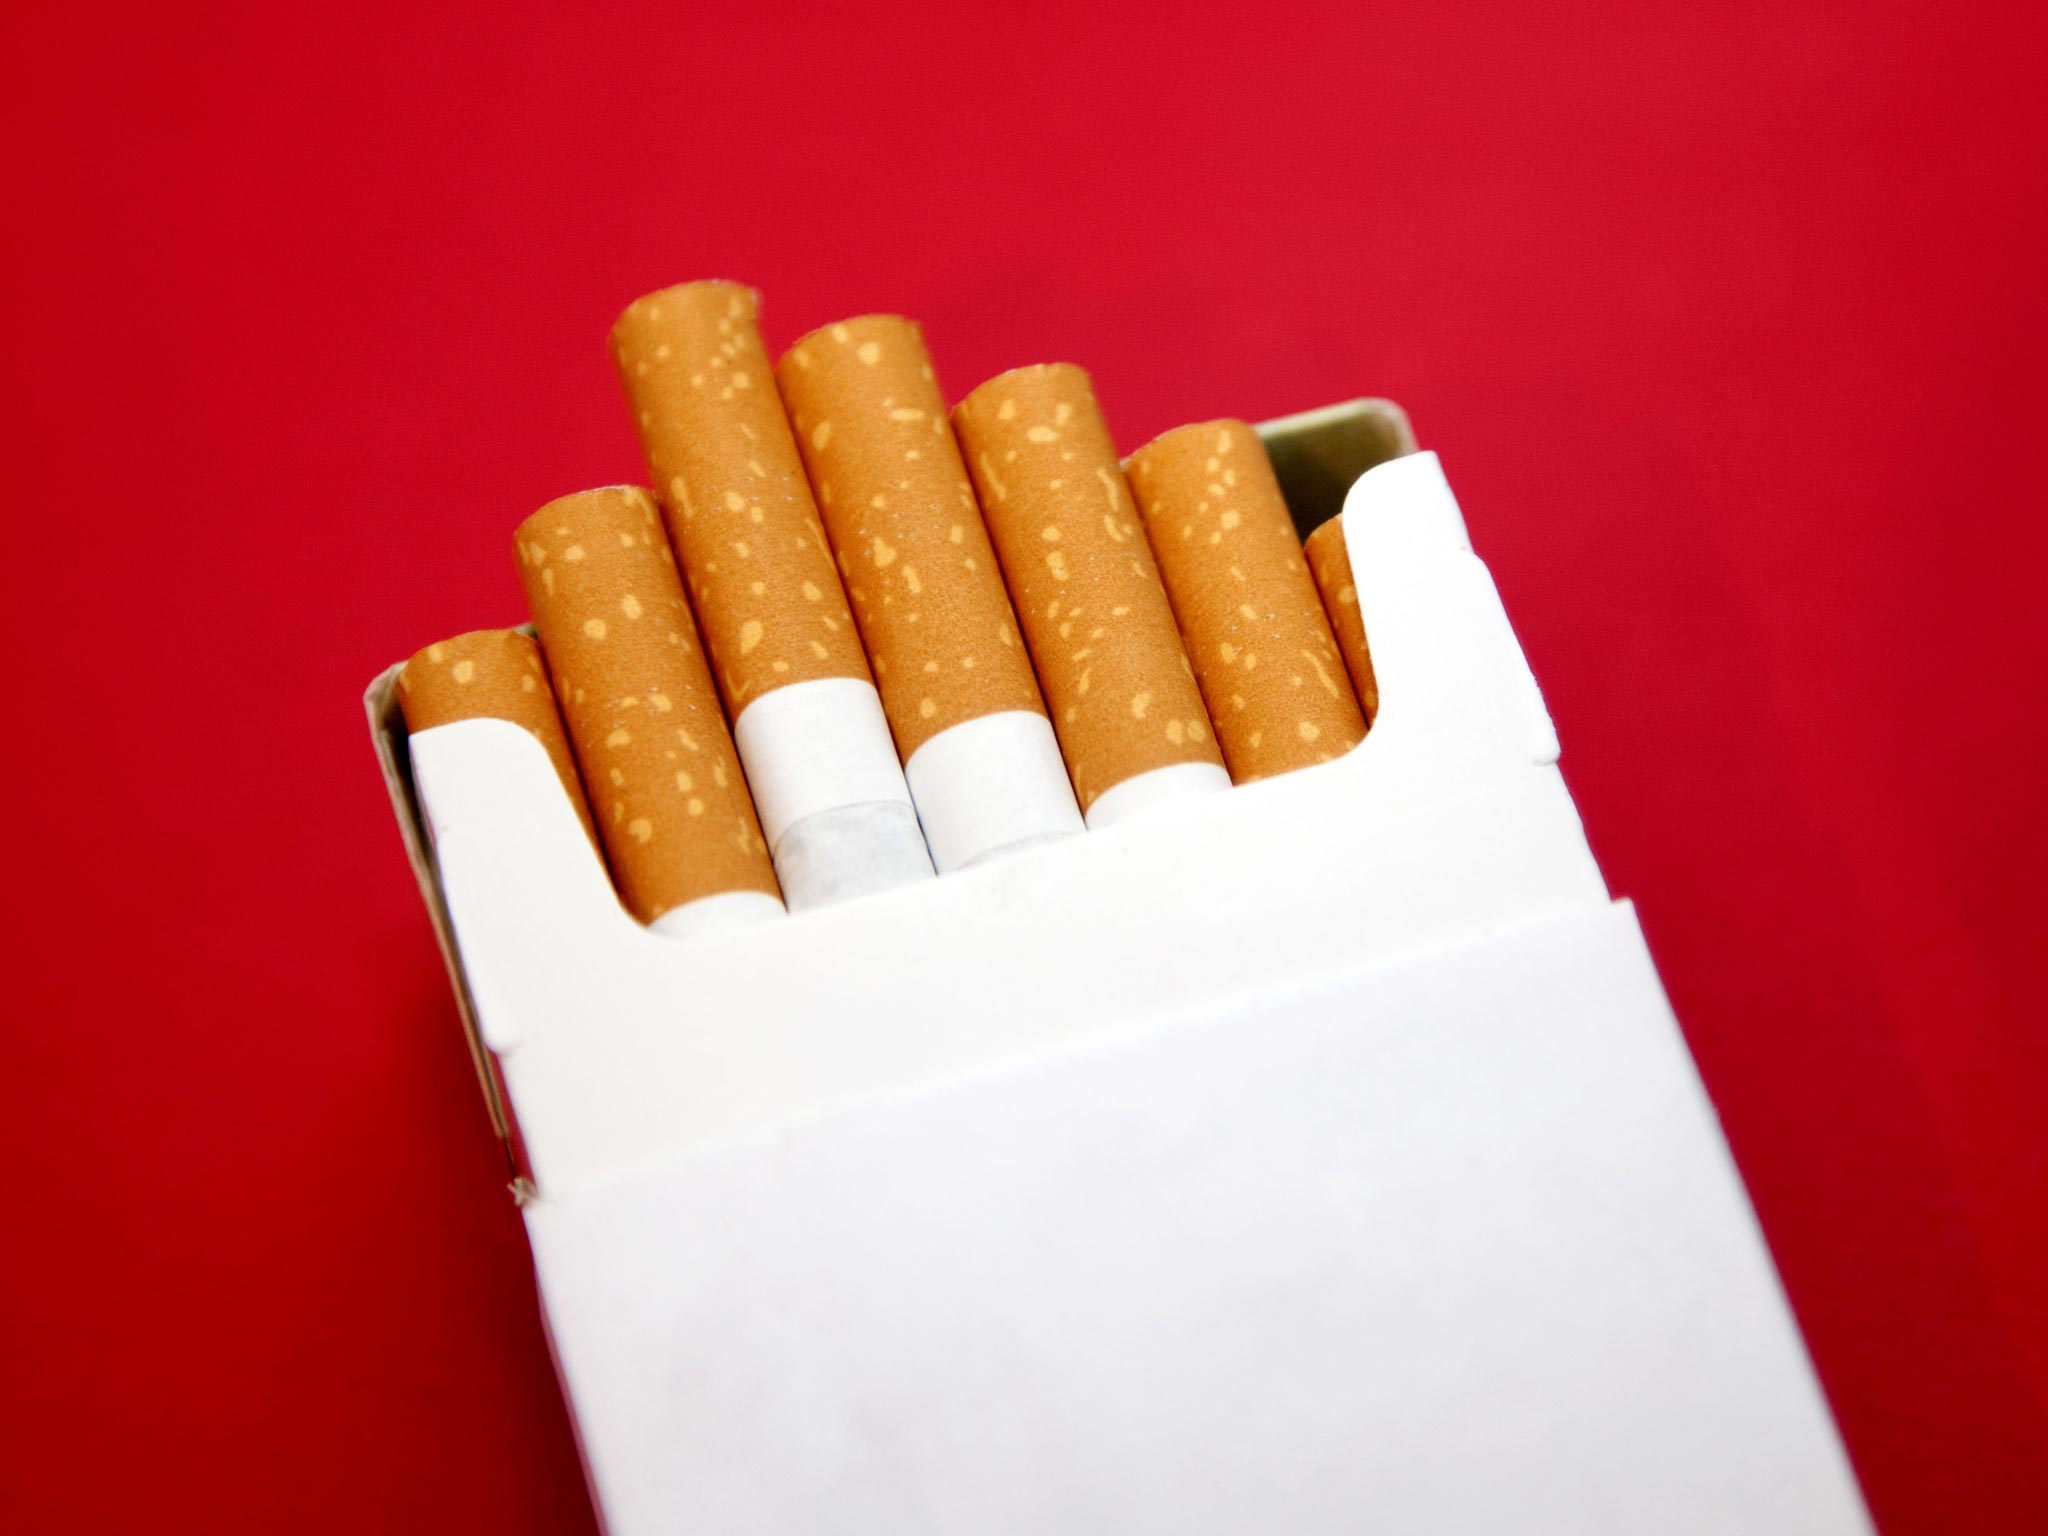 Health Minister Jane Ellison has said she was “minded” to introduce new regulations for standardised cigarette packaging